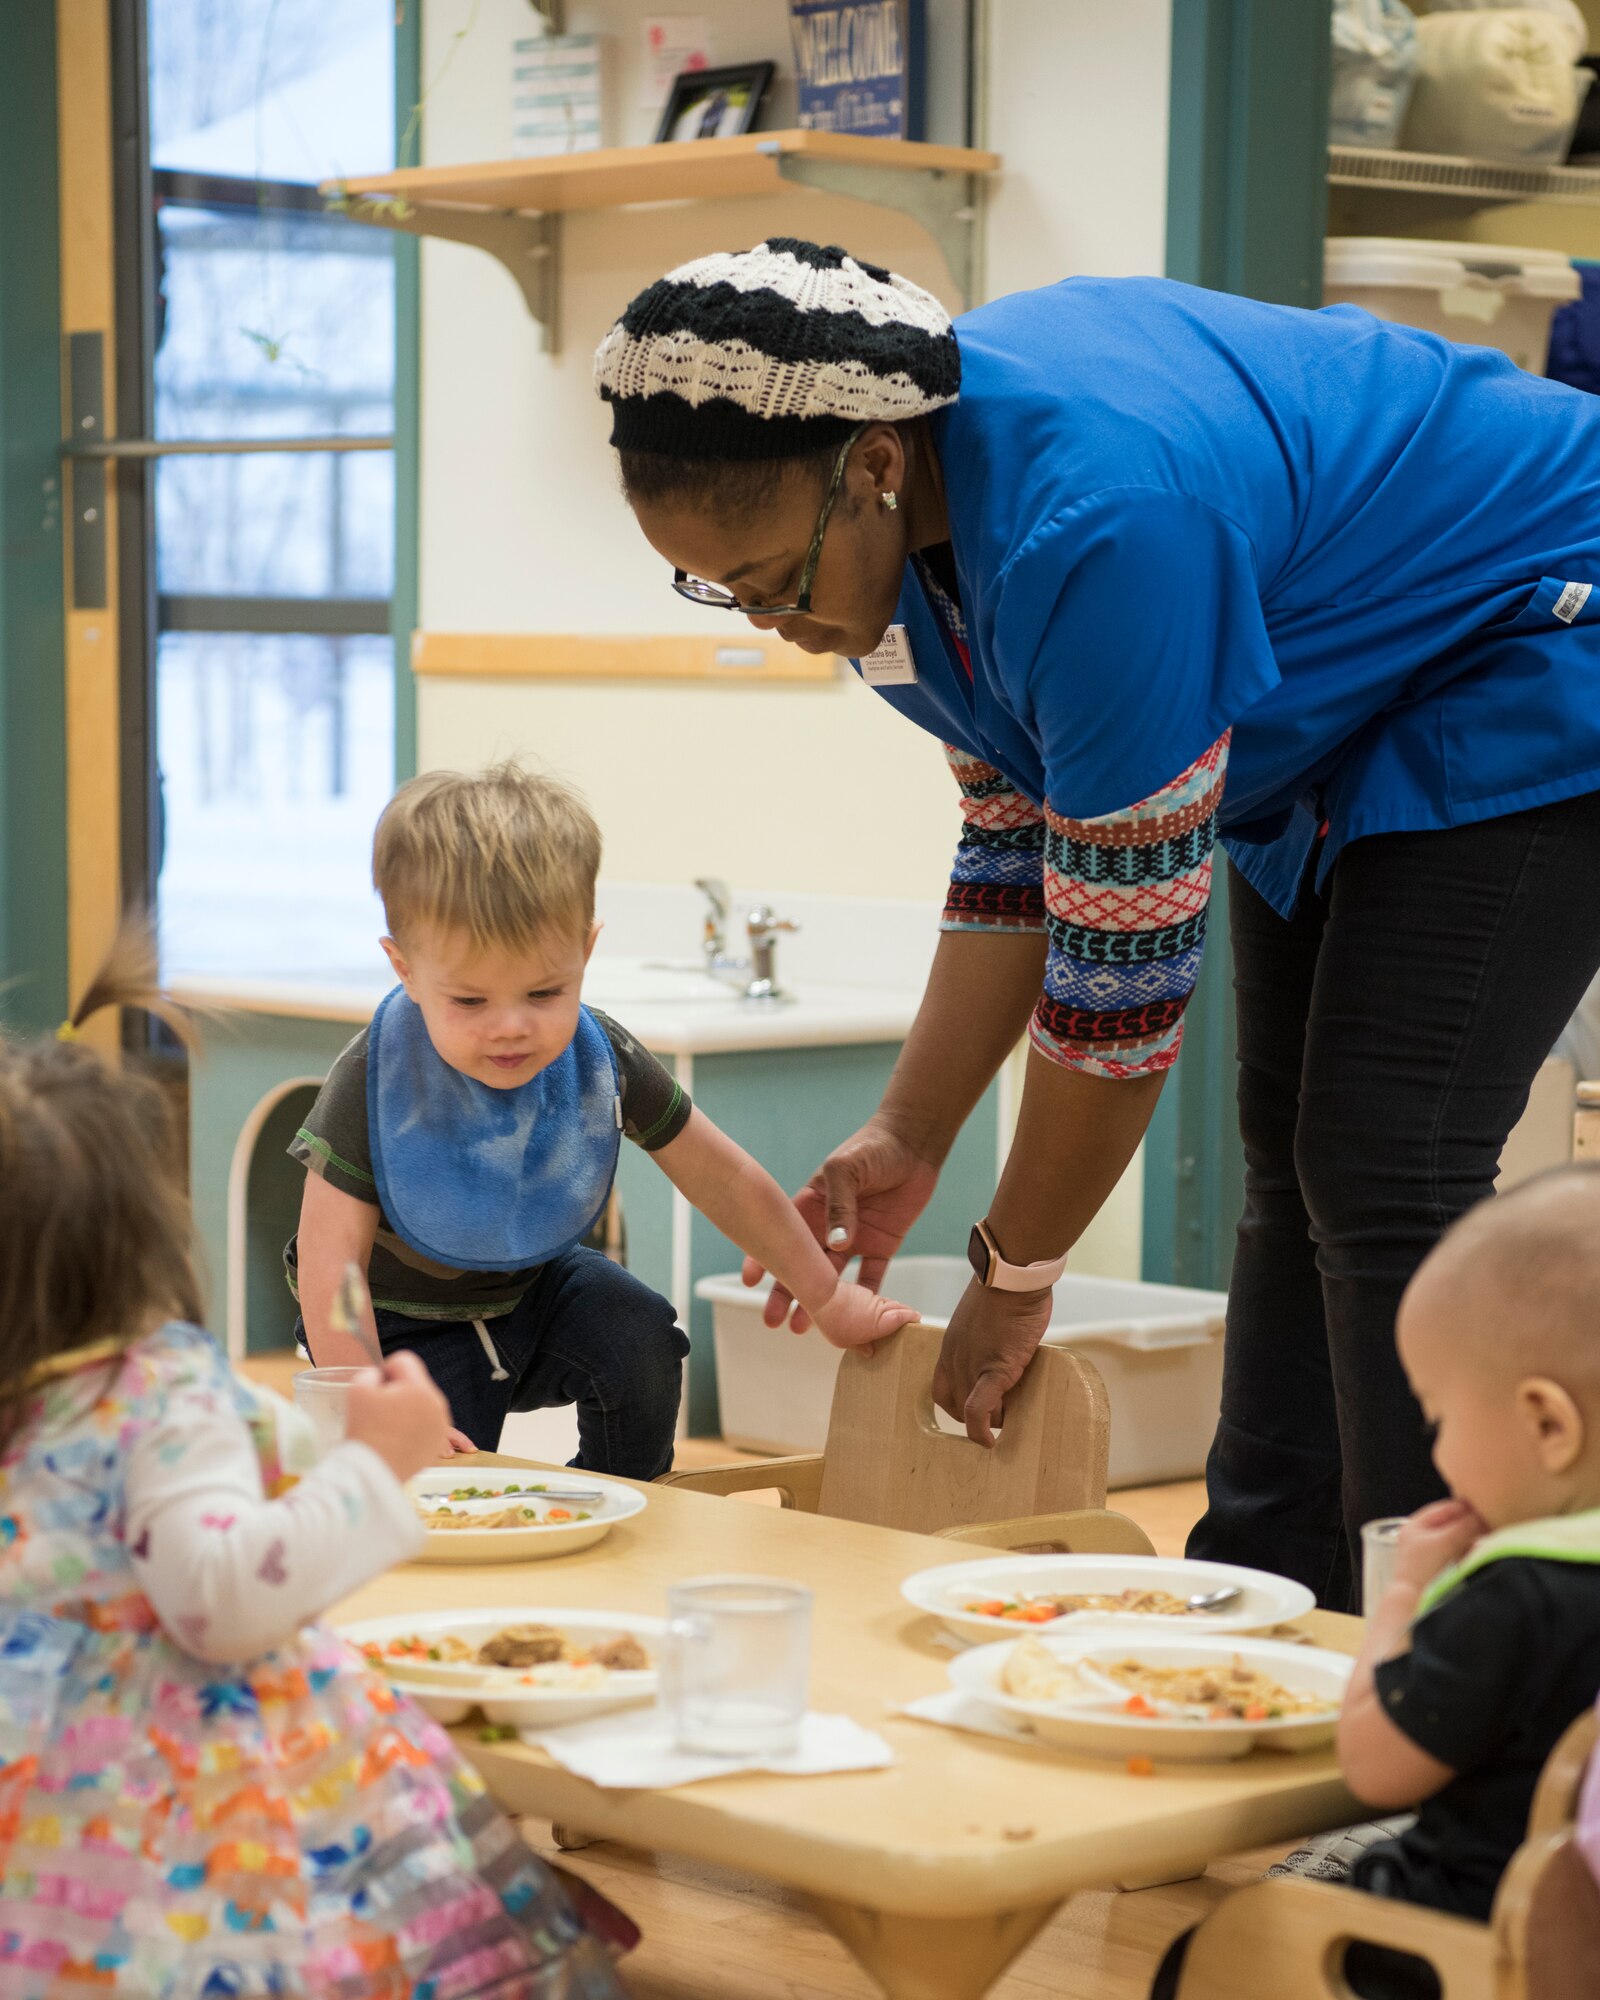 Latisha Boyd, a Sitka Child Development Center child and youth program assistant, teaches children to sit and eat at a table during meal time at Joint Base Elmendorf-Richardson, Alaska, Dec. 14, 2018. All five JBER CDC centers are accredited by the National Association for the Education of Young Children and provide childcare for ages 6 weeks to 5 years. Due to a shortage in workers JBER is hiring child development center workers – including teachers, cooks and food service workers.